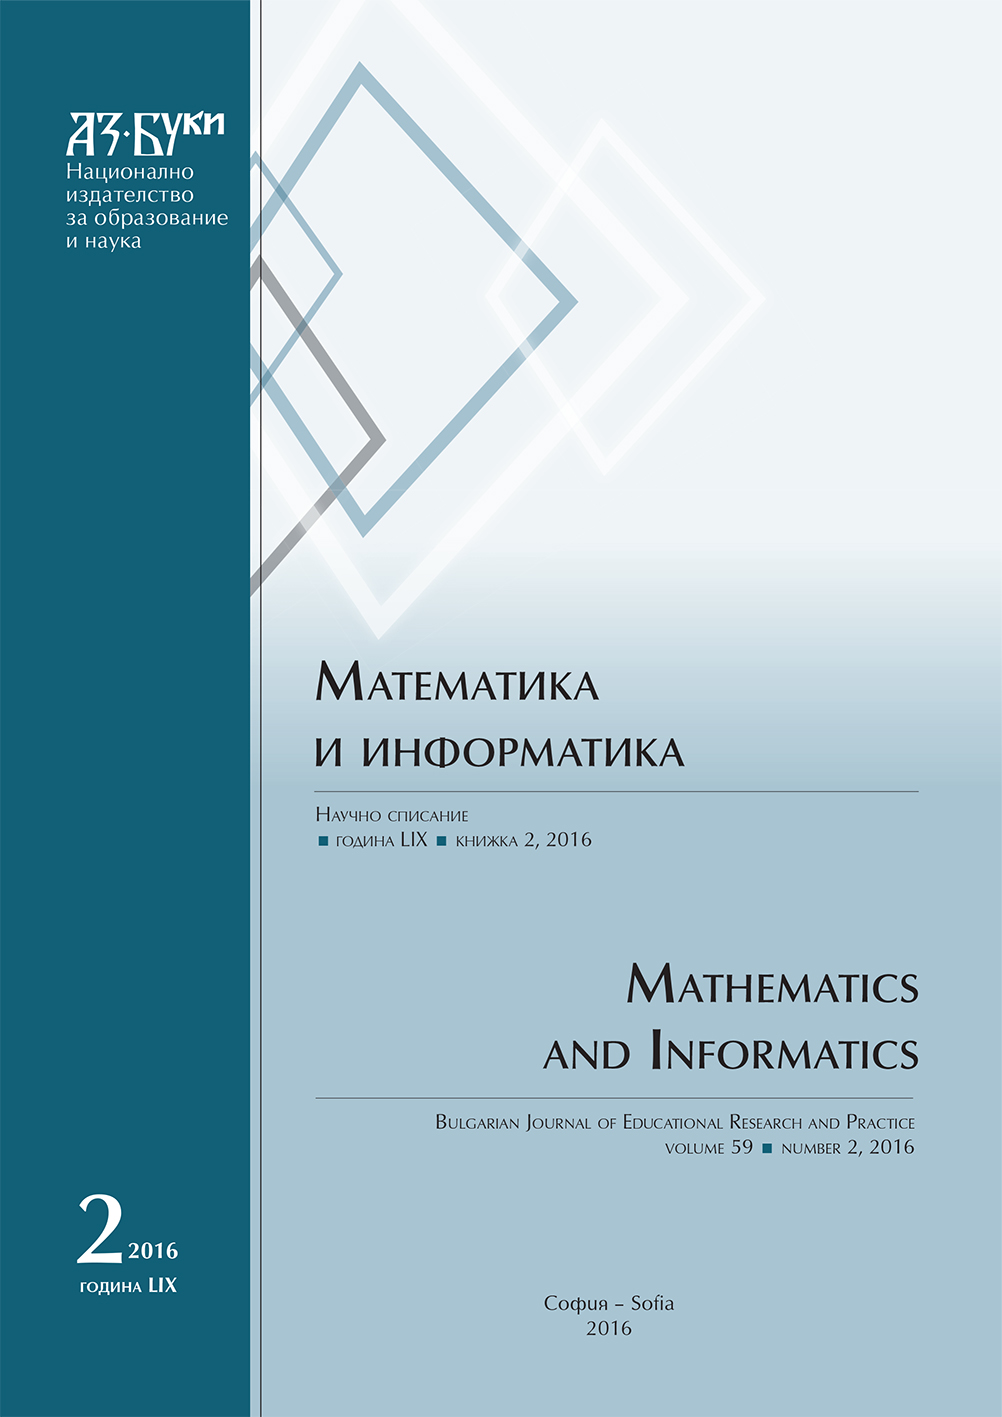 Development of the Mathematical Education in Russia in the XVIII Century Cover Image